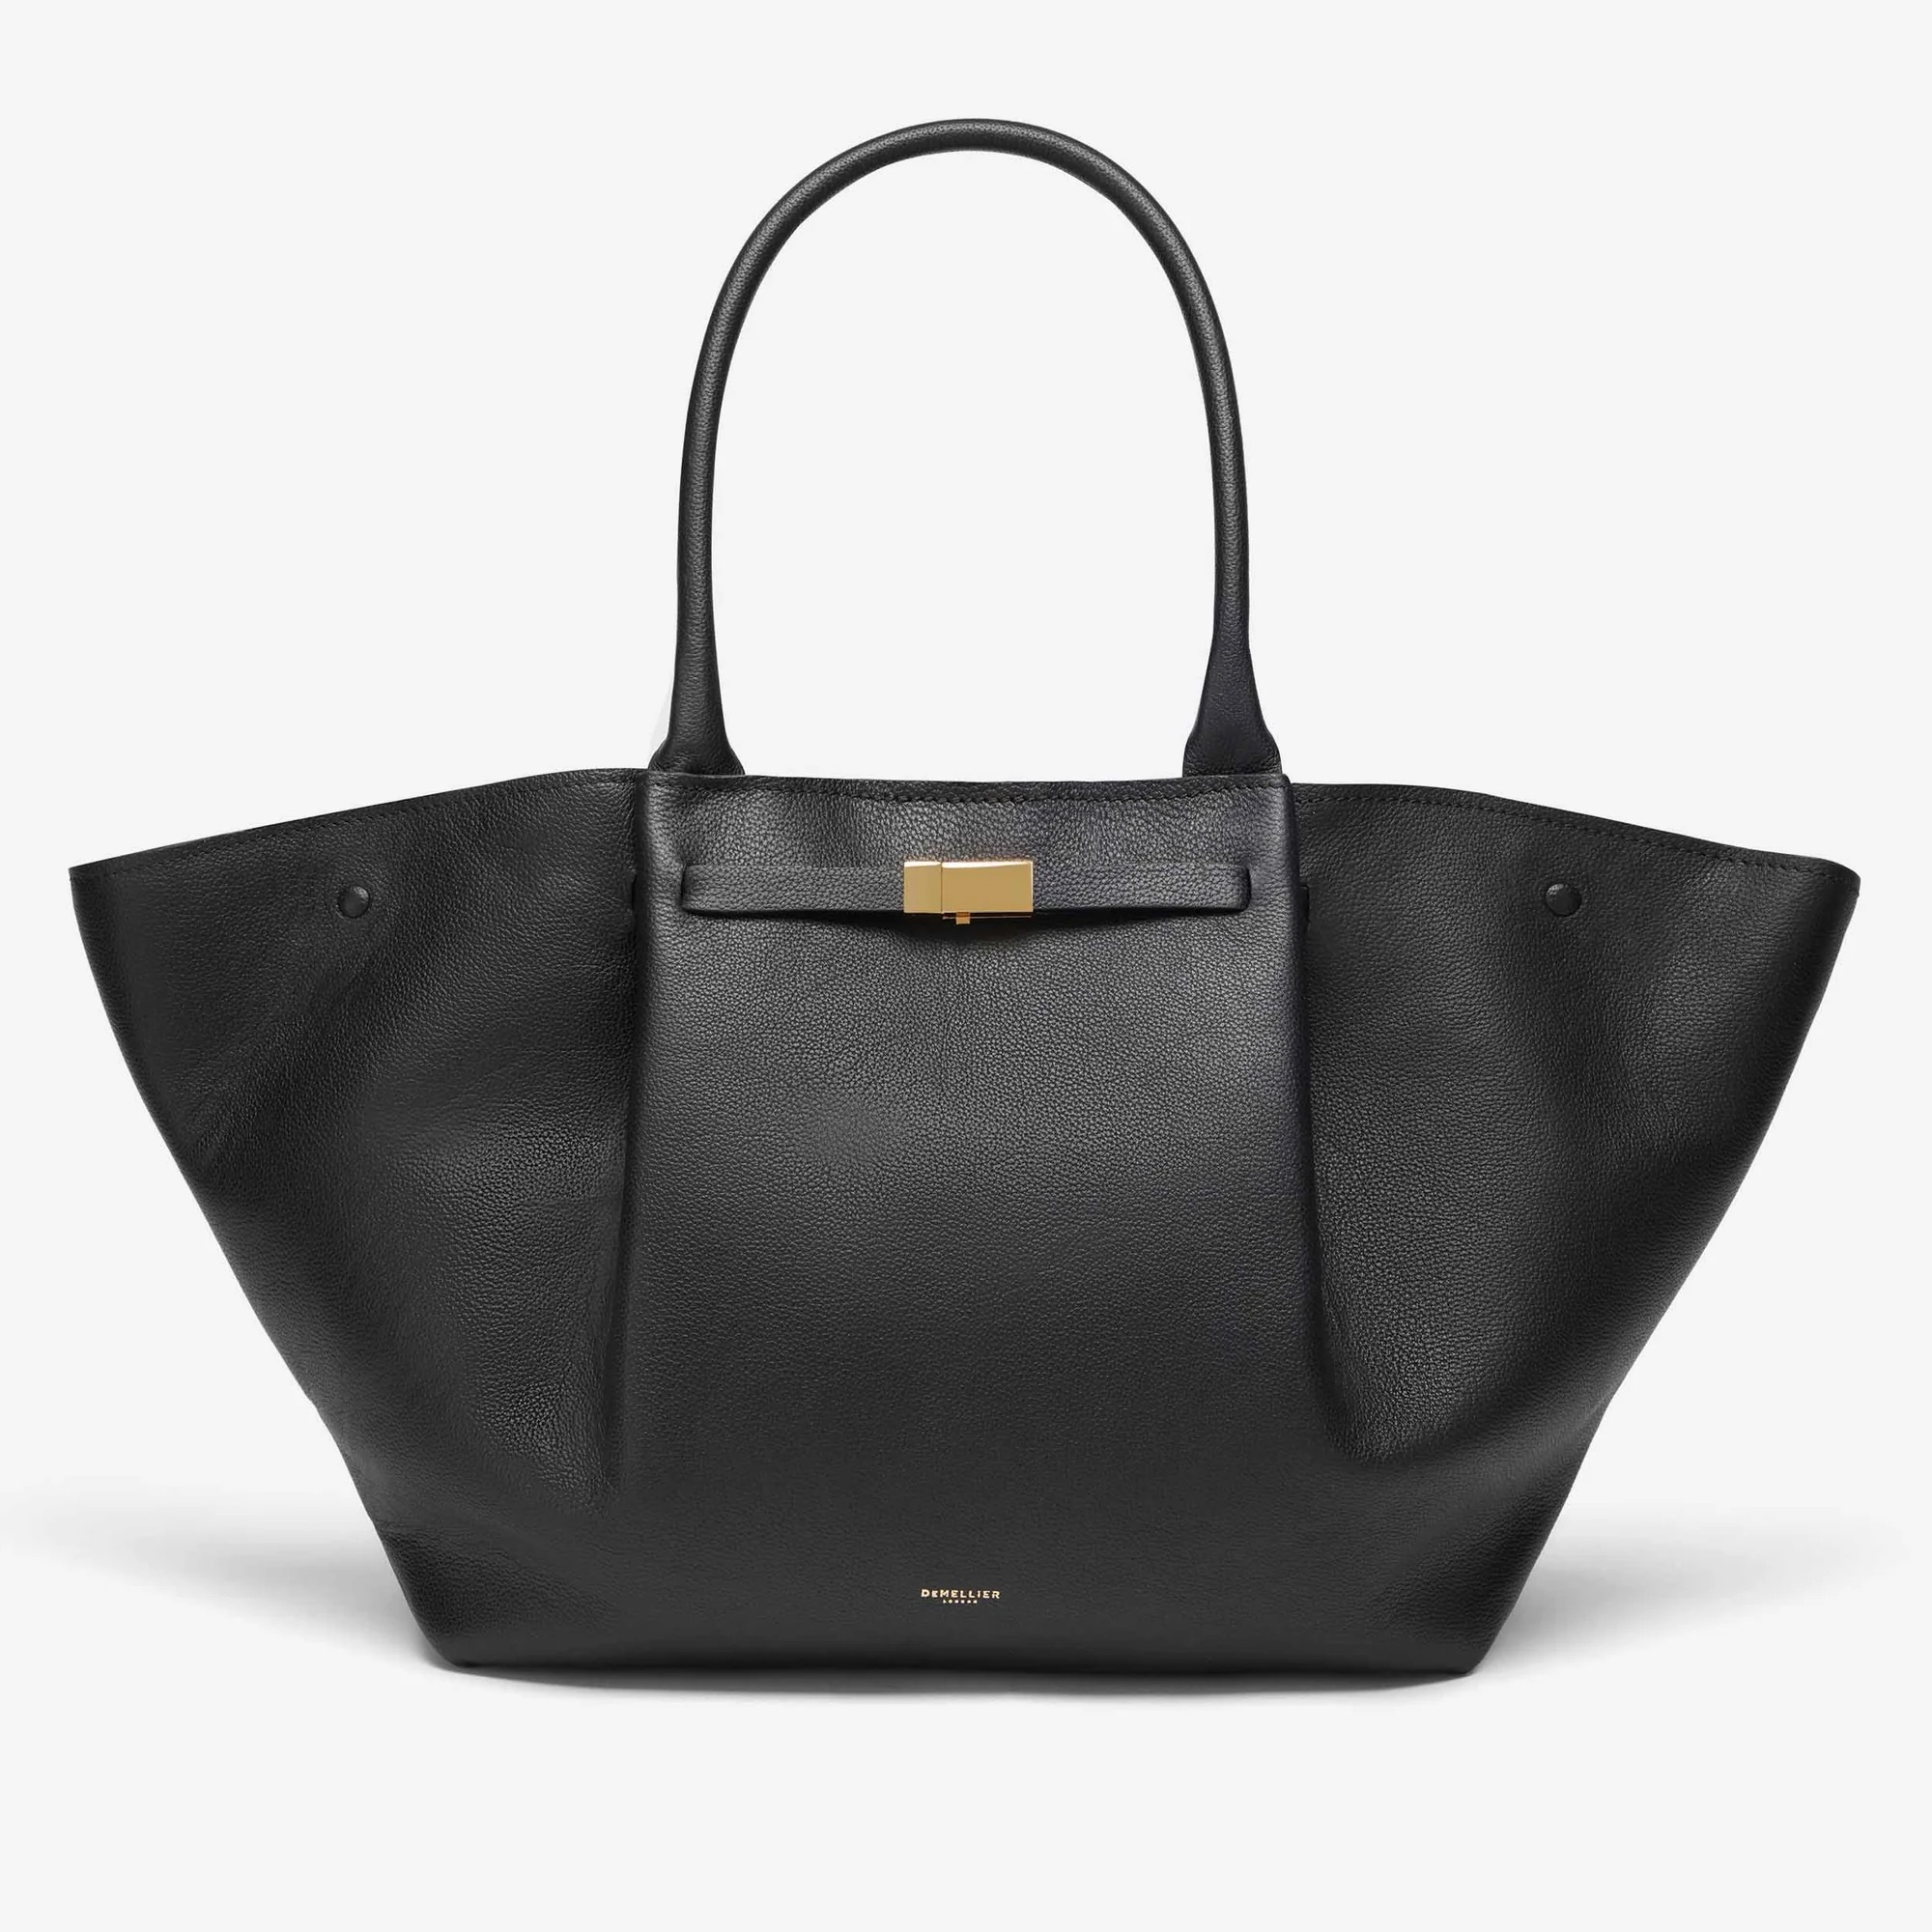 5 BEST Black Luxury Handbags To Invest In *THESE ARE AMAZING 